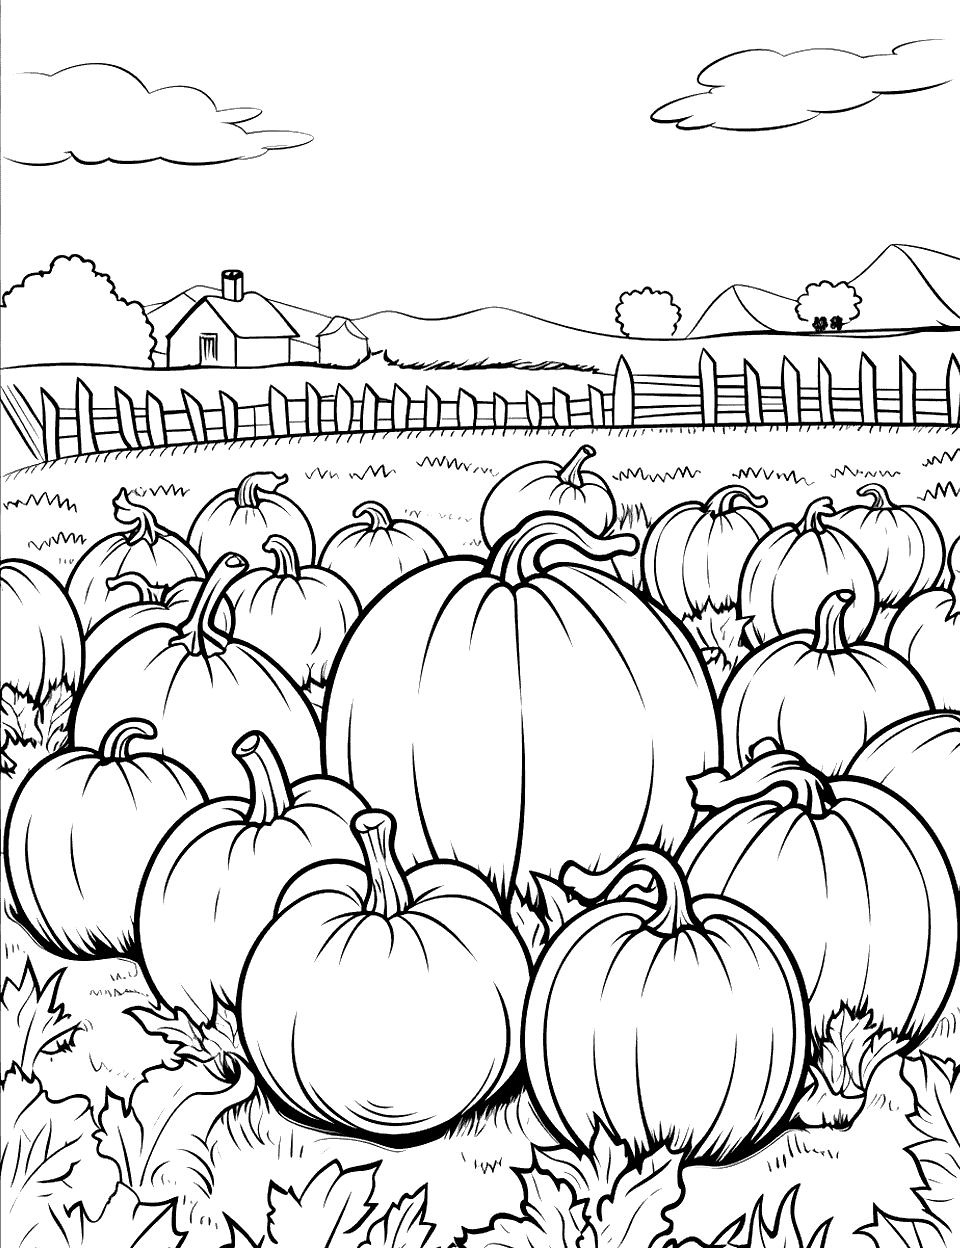 Pumpkin Harvest Farm Coloring Page - A field filled with pumpkins ready for harvest.